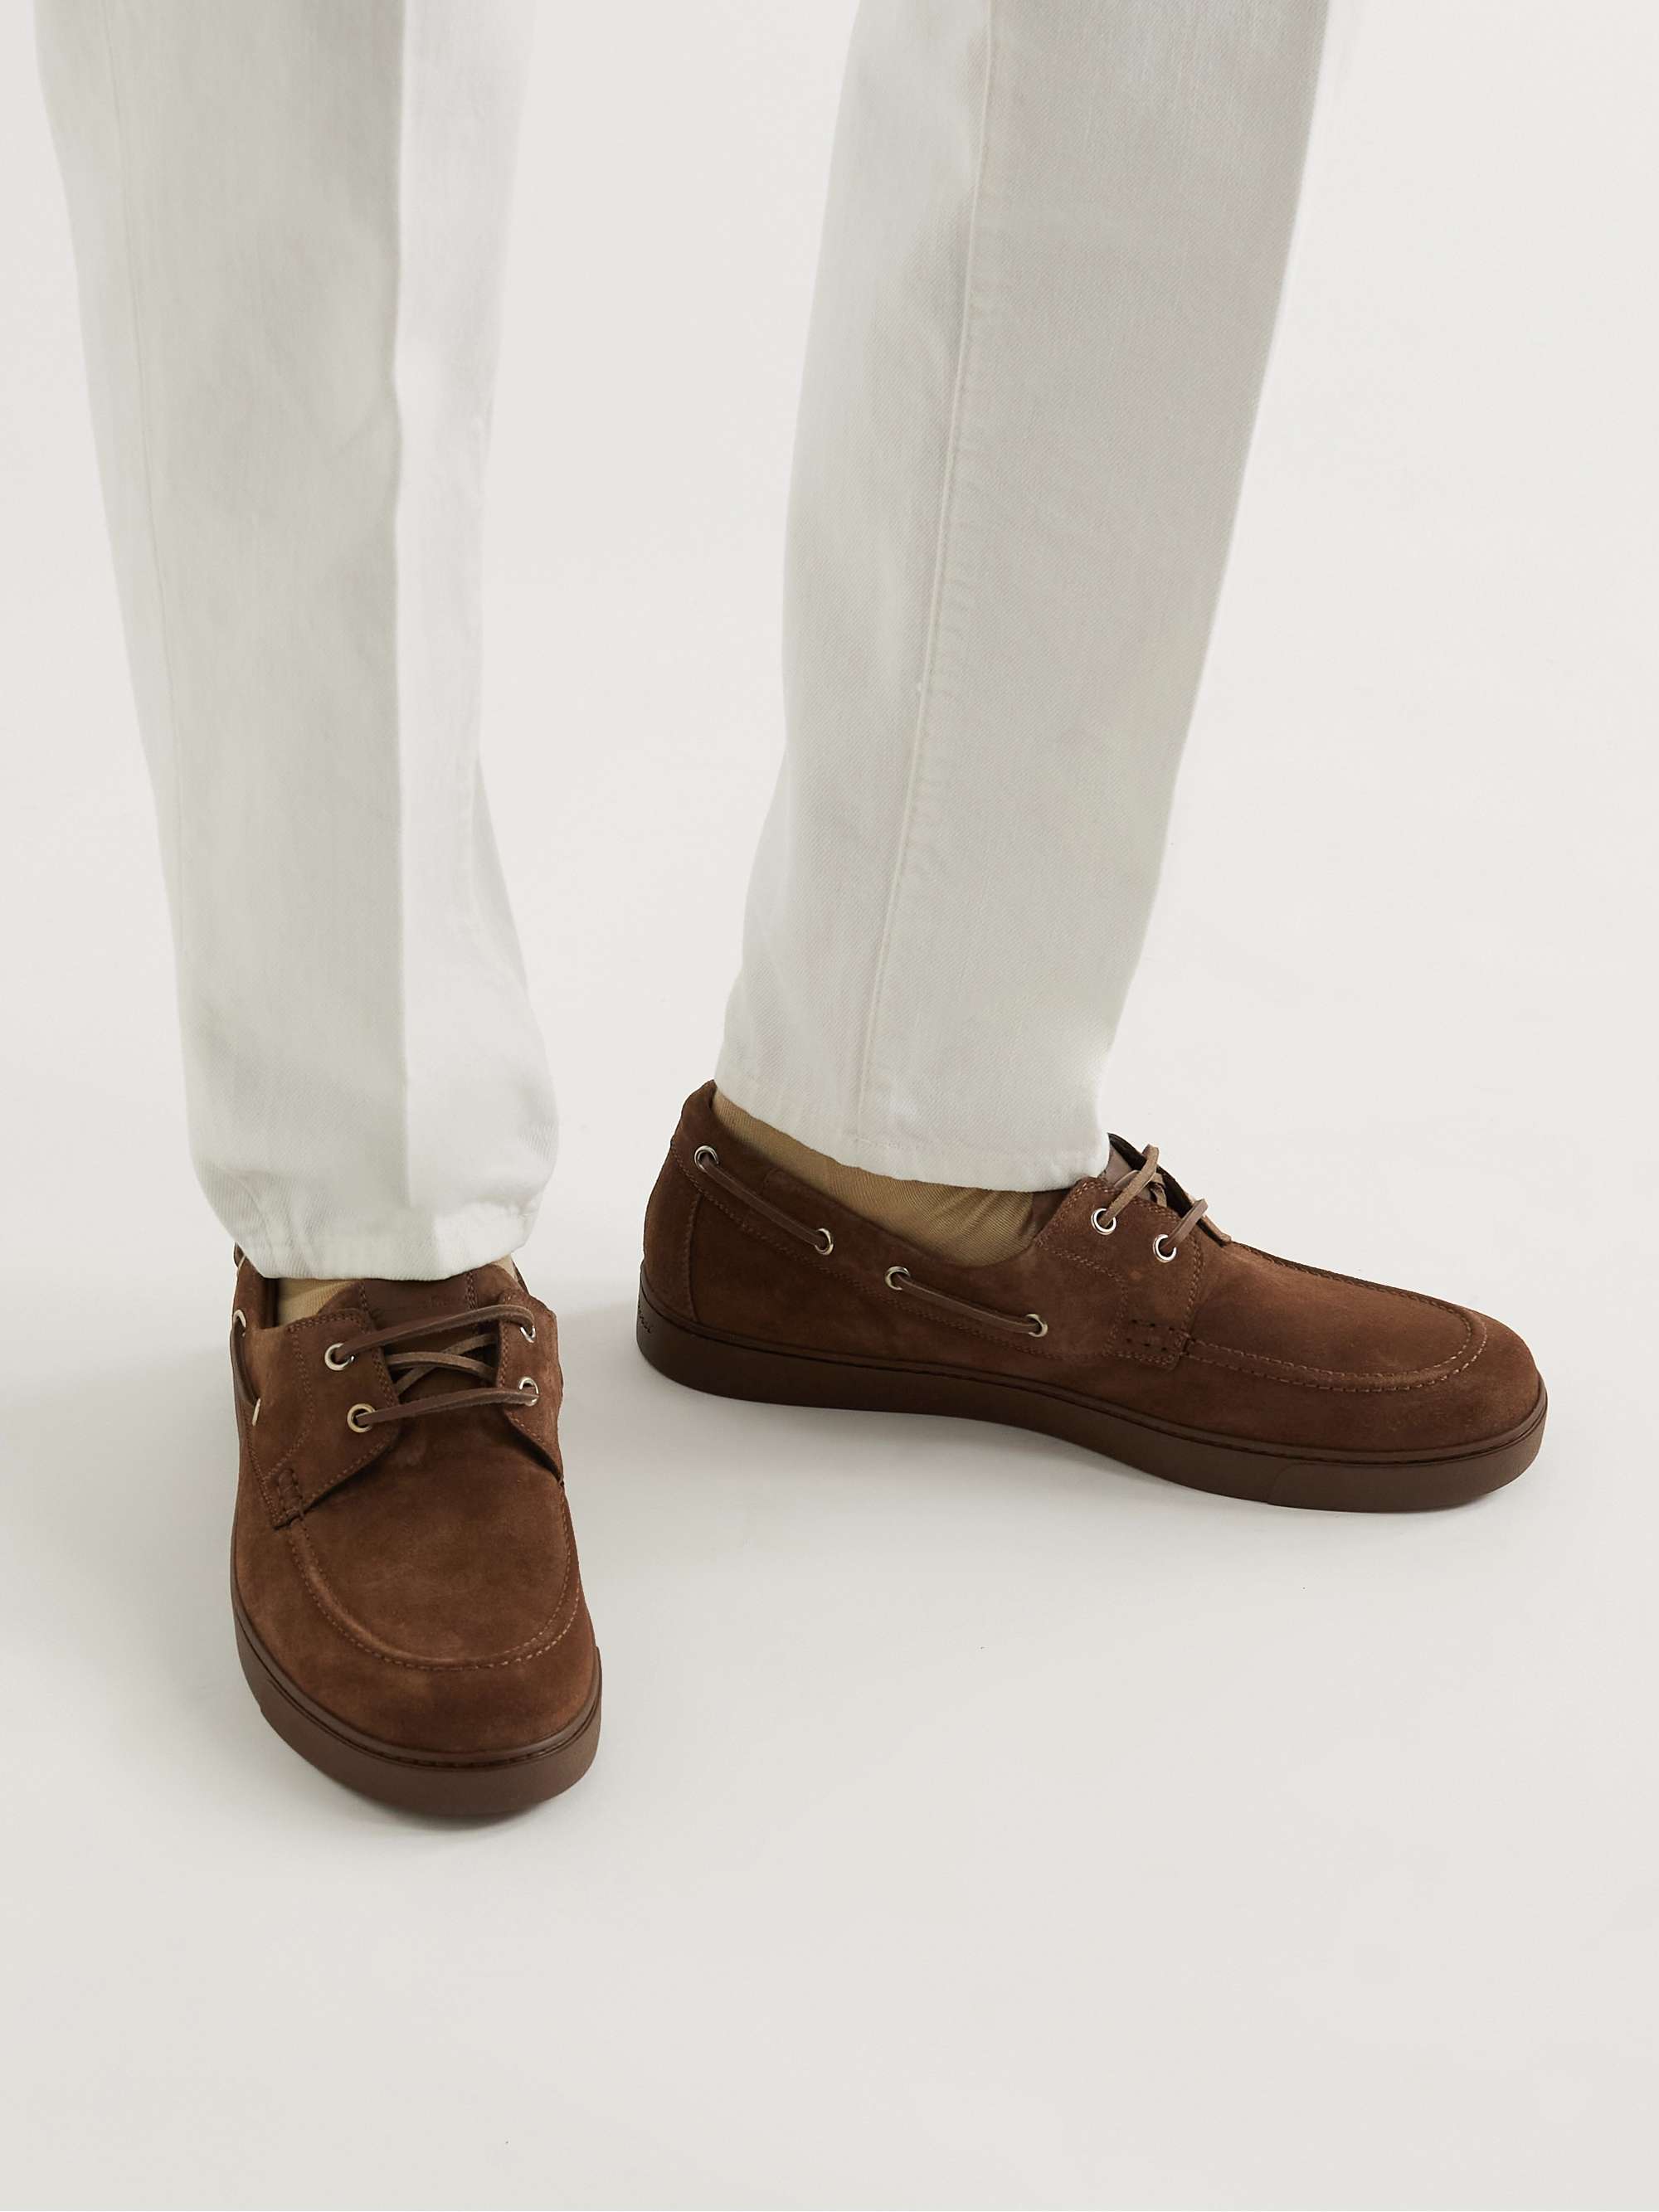 GIANVITO ROSSI Suede Boat Shoes